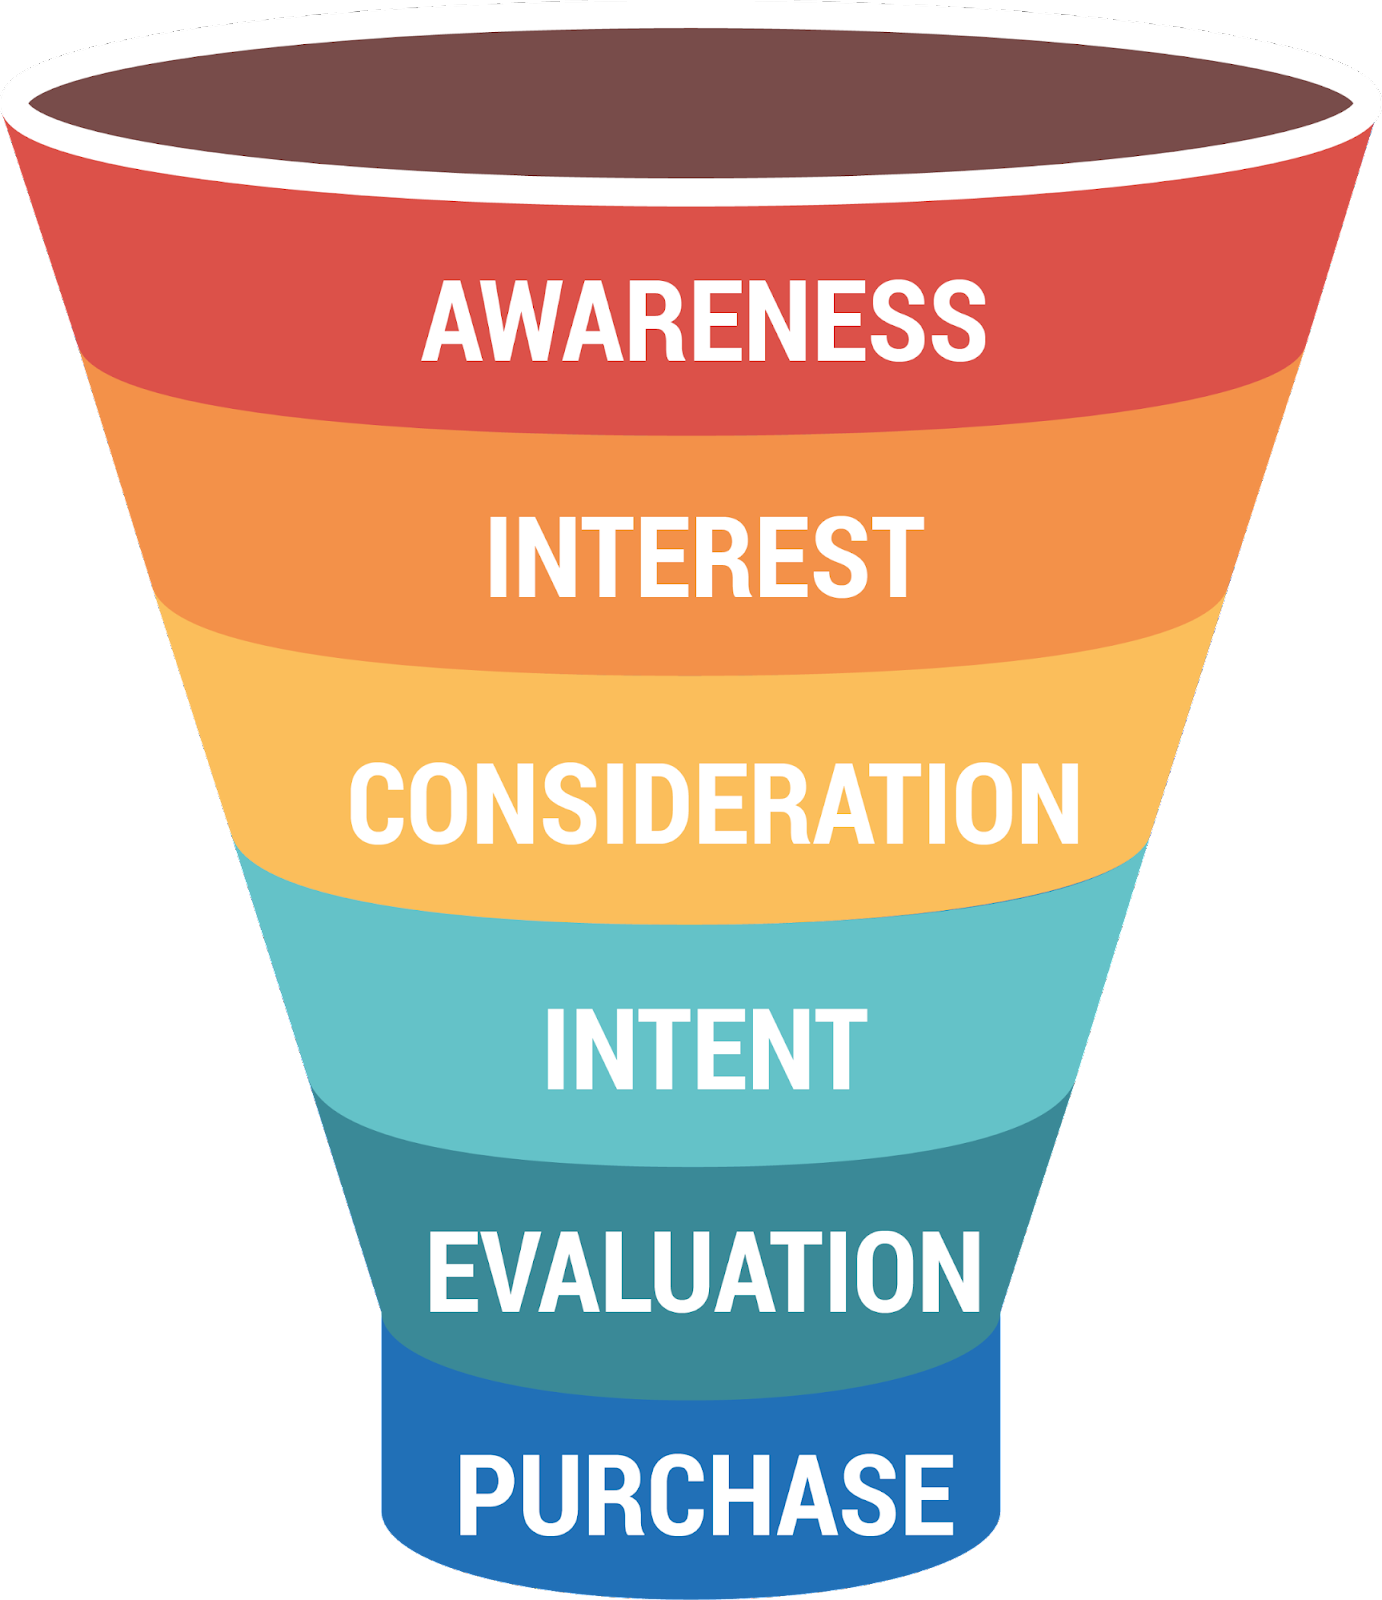 The marketing funnel 